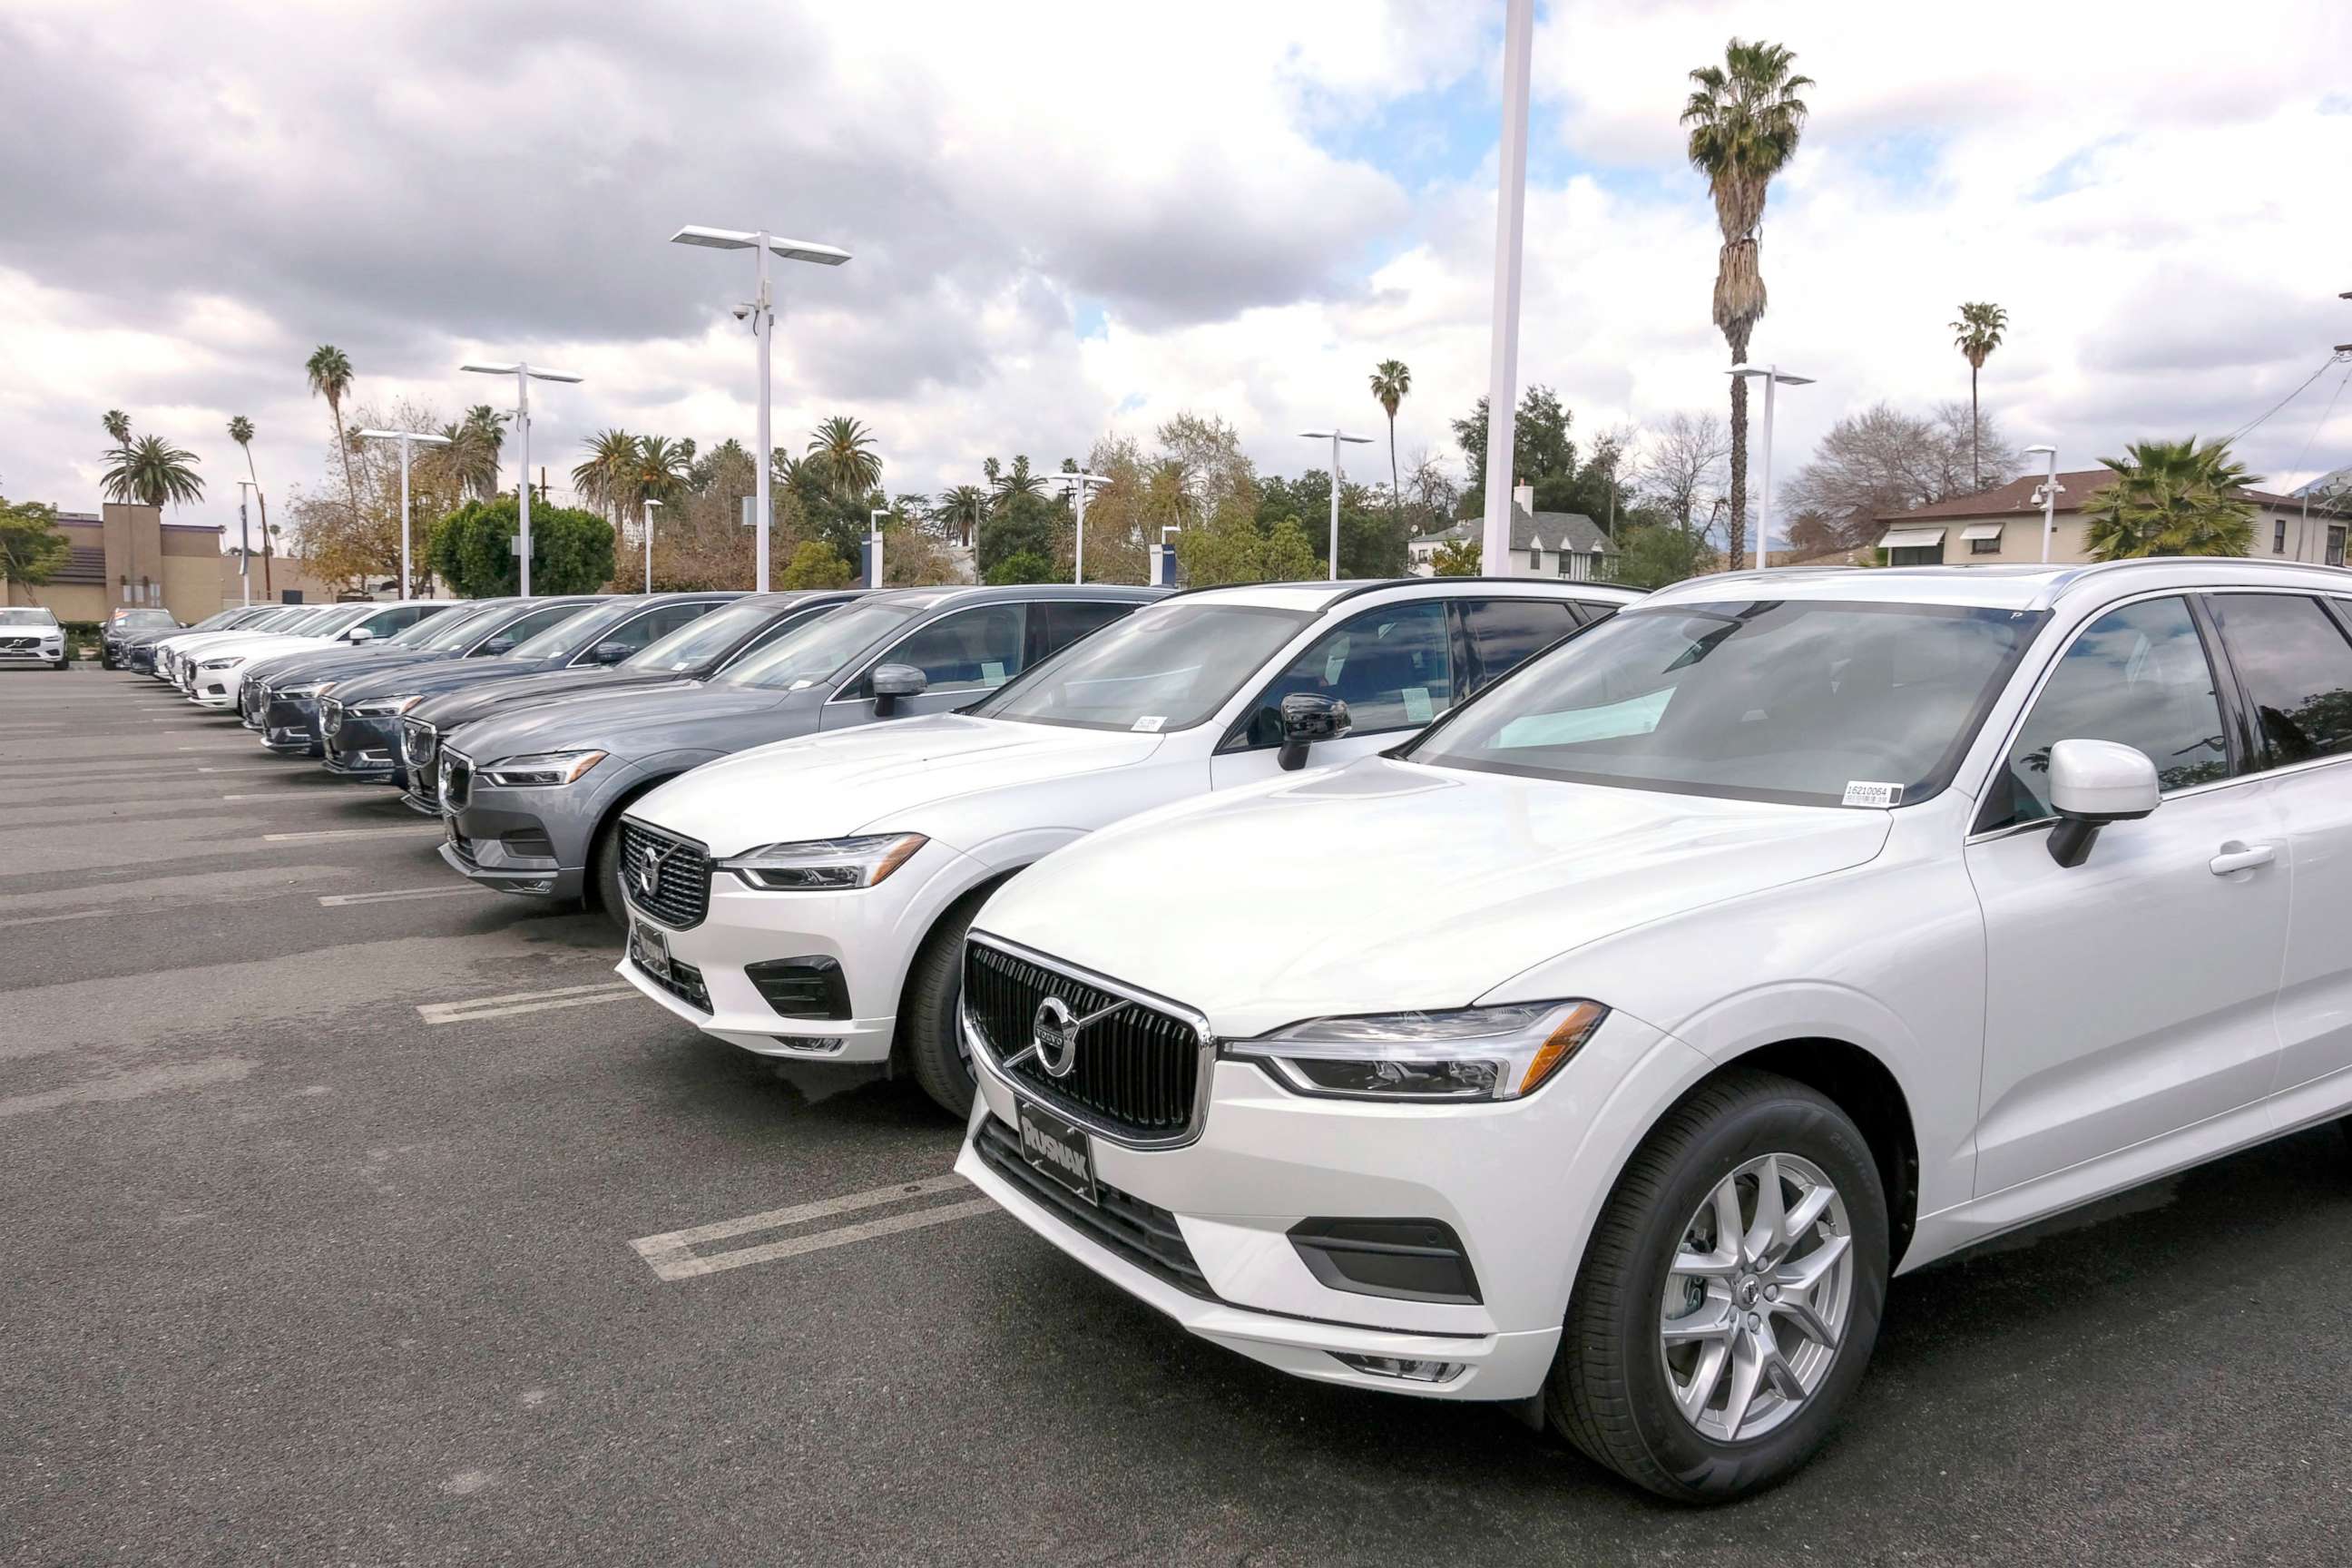 PHOTO: Volvo cars are seen at a car dealership in Pasadena, Calif., on March 8, 2021.